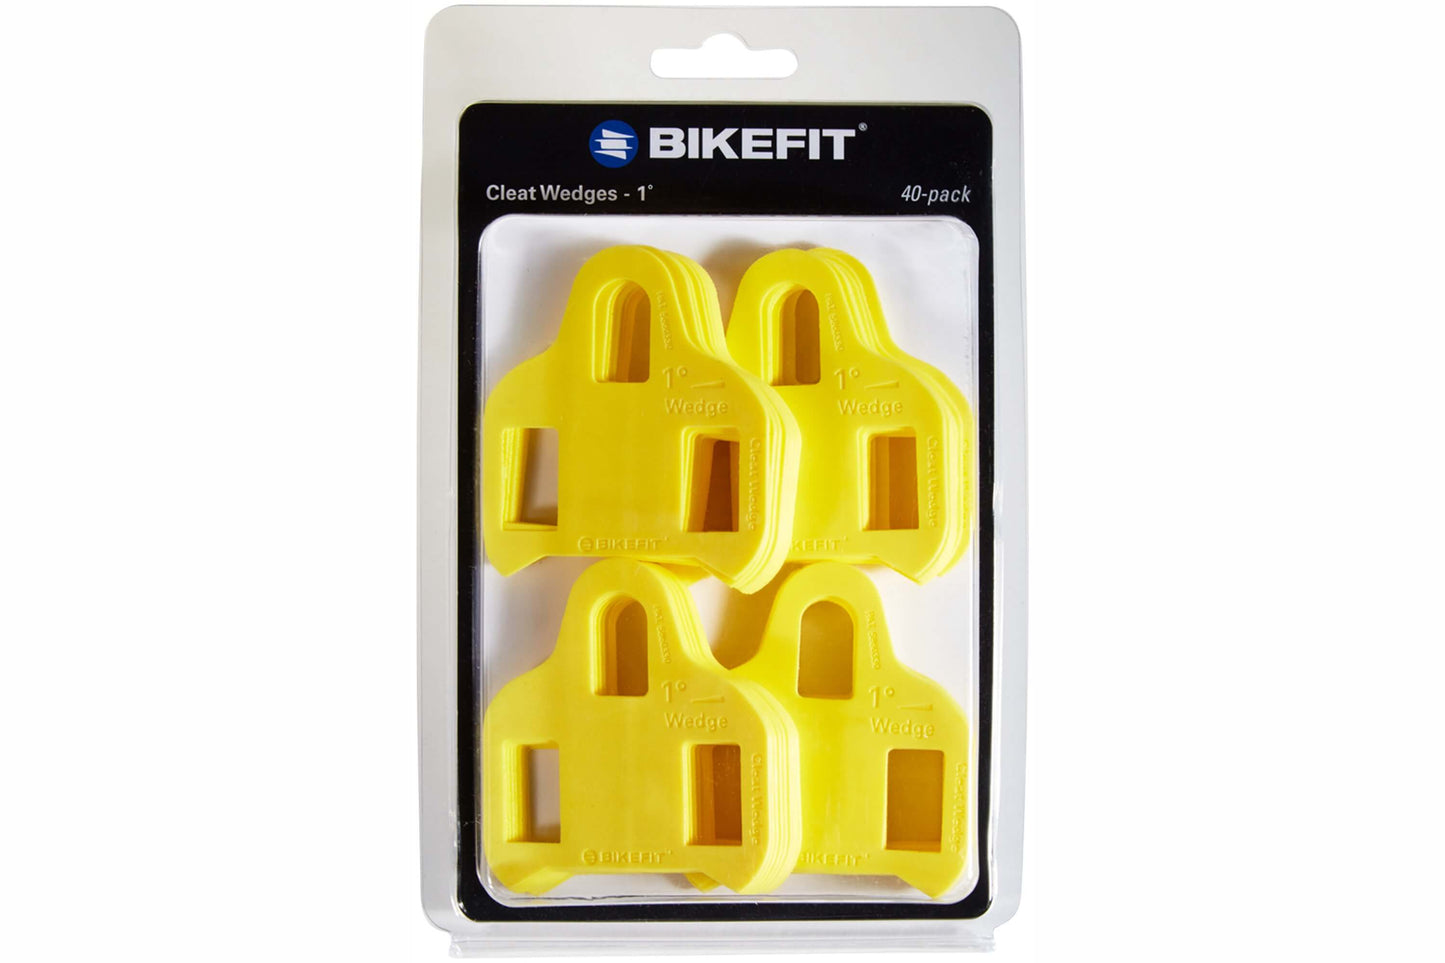 BikeFit Cleat Wedges - LOOK Compatible 40 Pack, Shown in Packaging